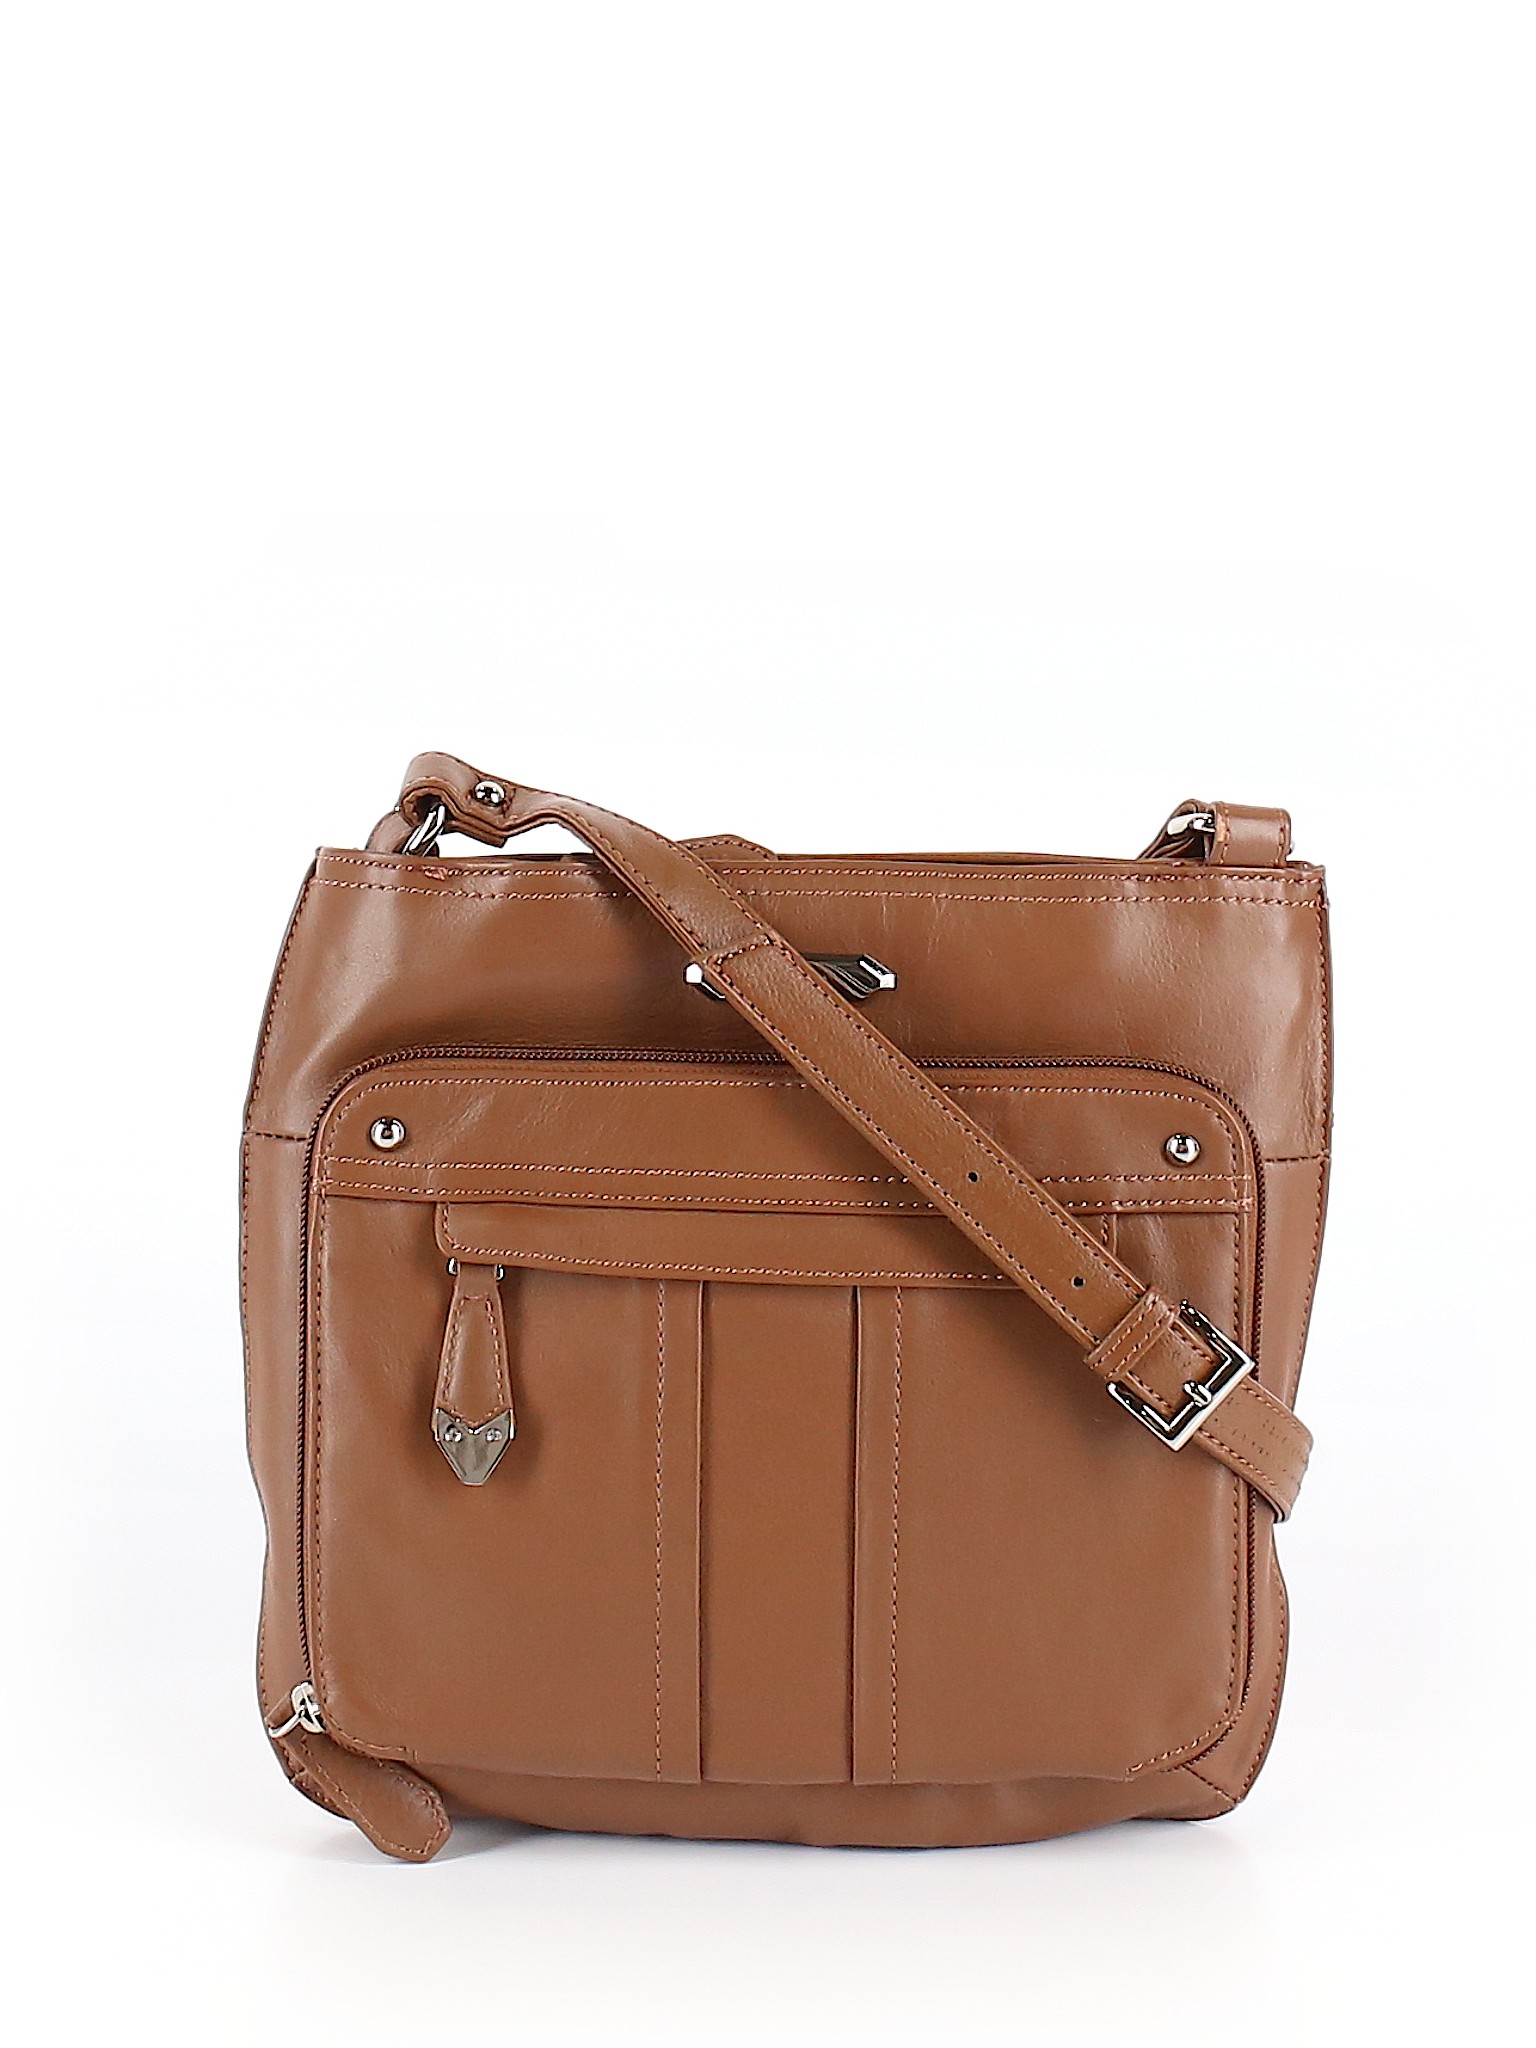 Perlina Solid Brown Crossbody Bag One Size - 71% off | thredUP